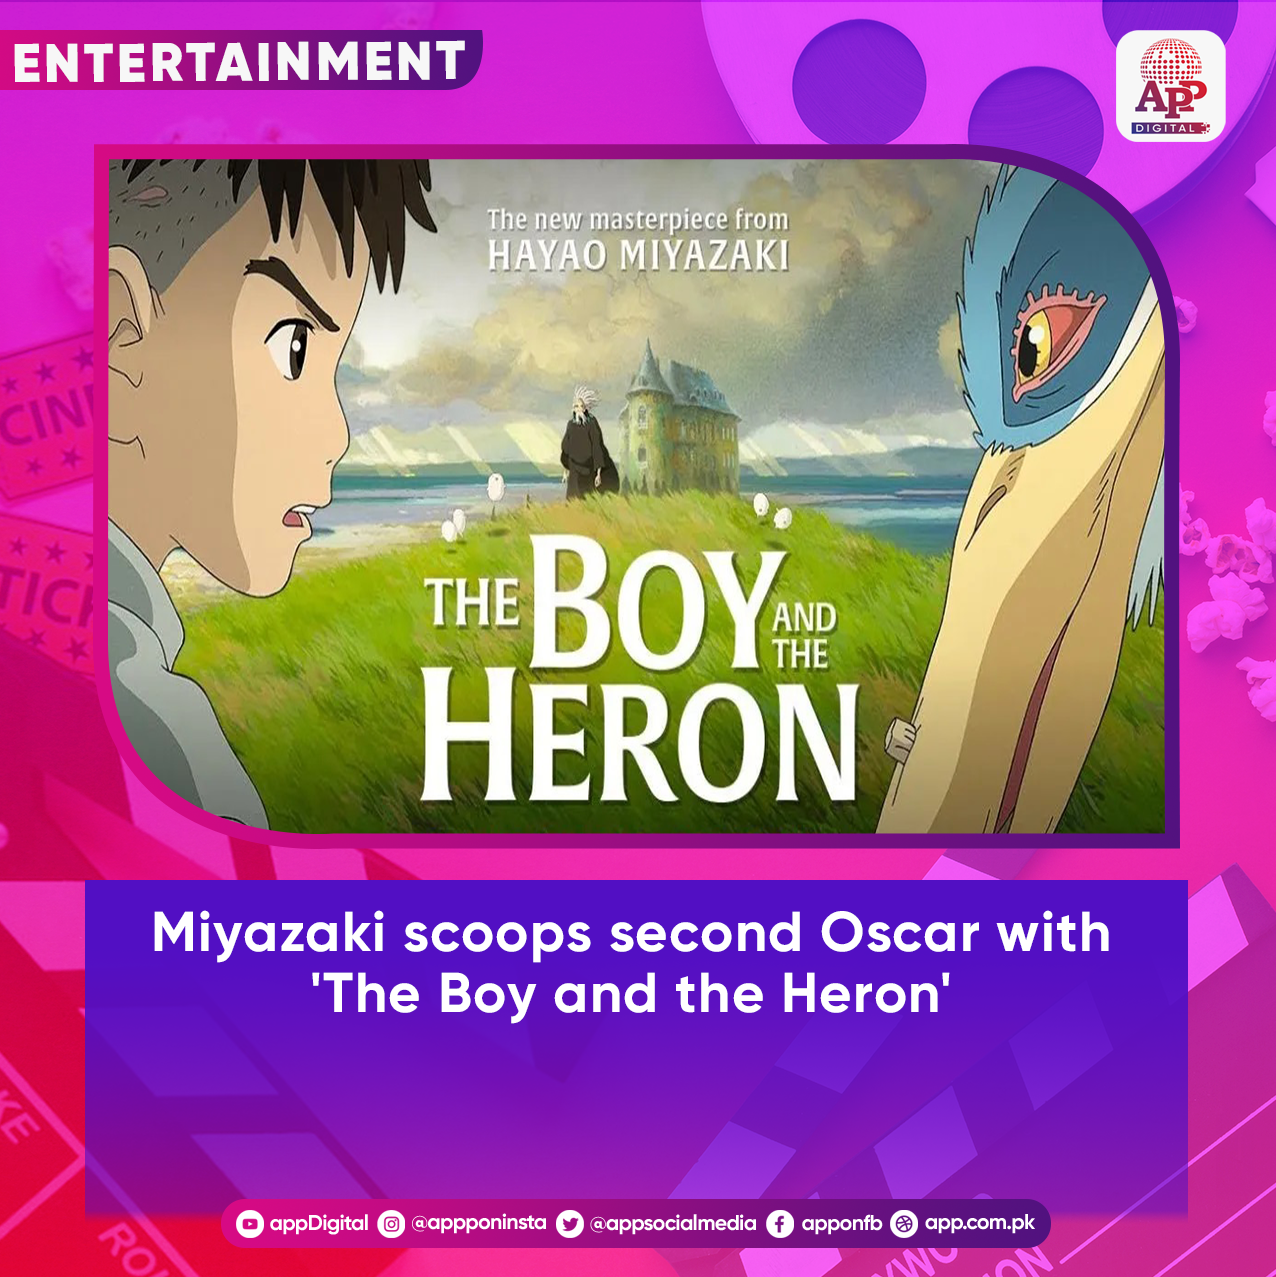 Miyazaki scoops second Oscar with 'The Boy and the Heron'